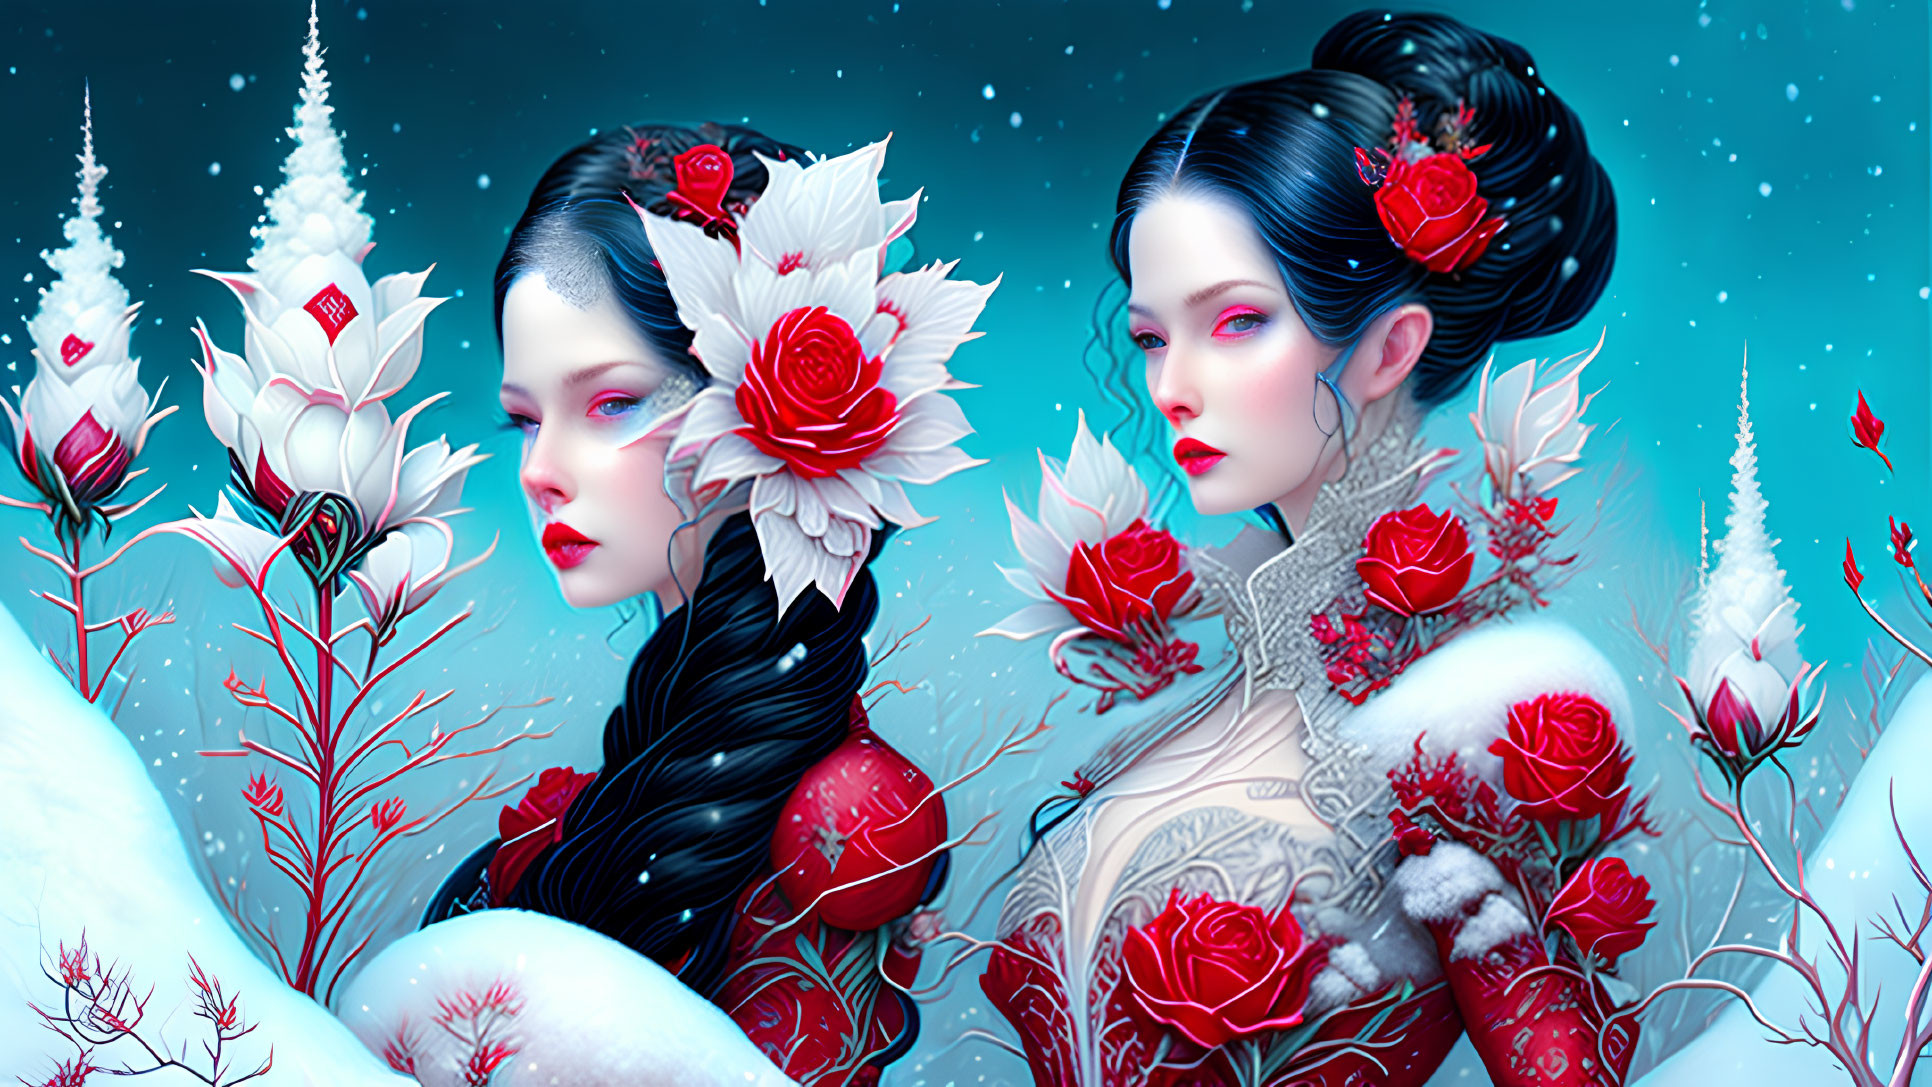 Stylized women with pale skin and dark hair adorned with red flowers in snowy backdrop